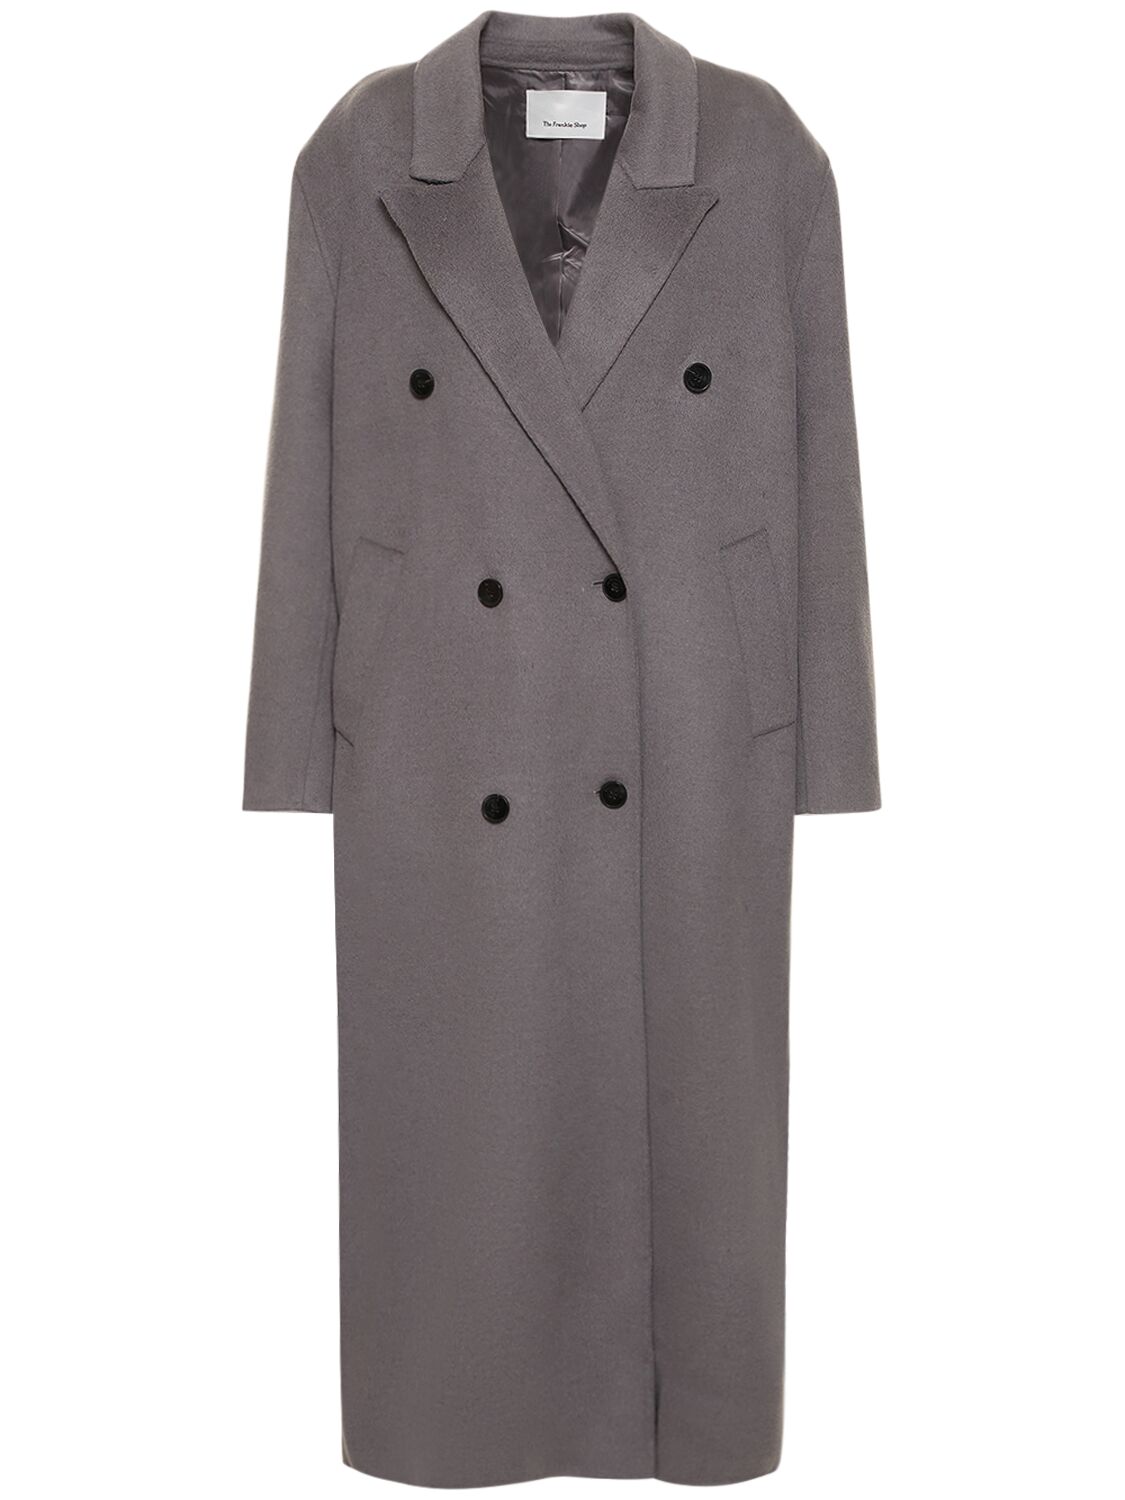 THE FRANKIE SHOP GAIA DOUBLE BREASTED WOOL LONG COAT